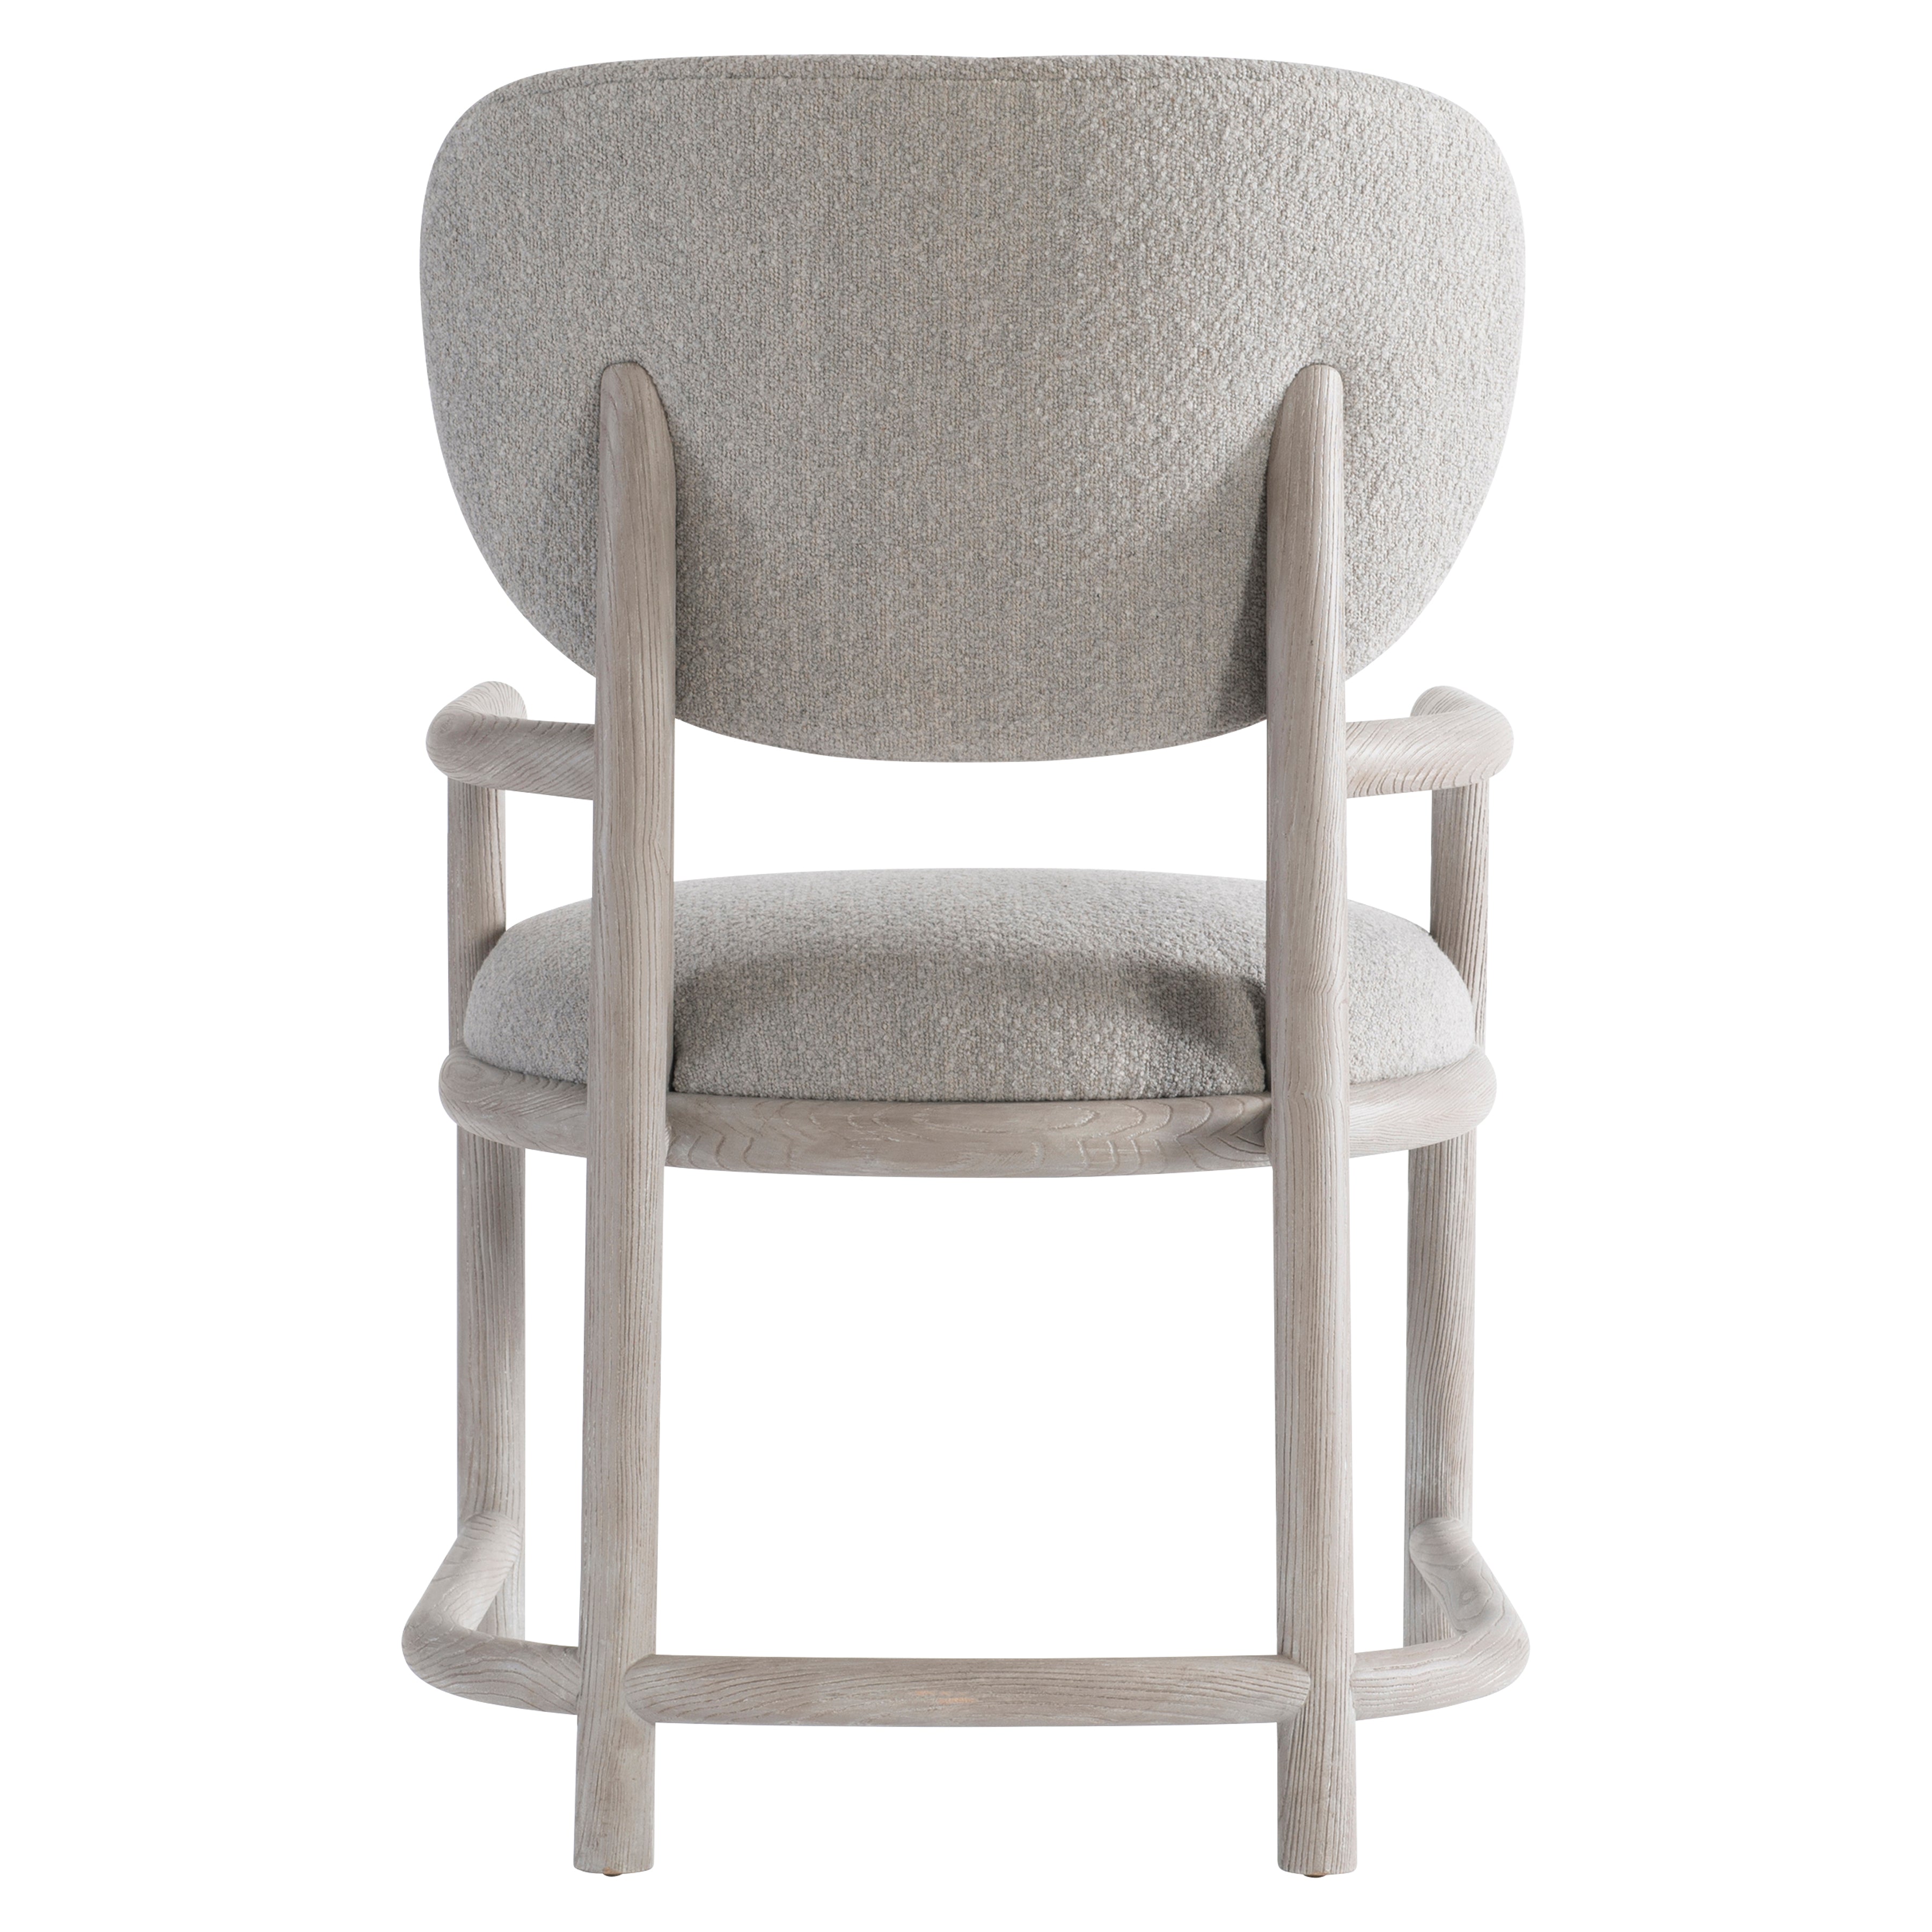 Trianon Arm Chair in Gris Finish